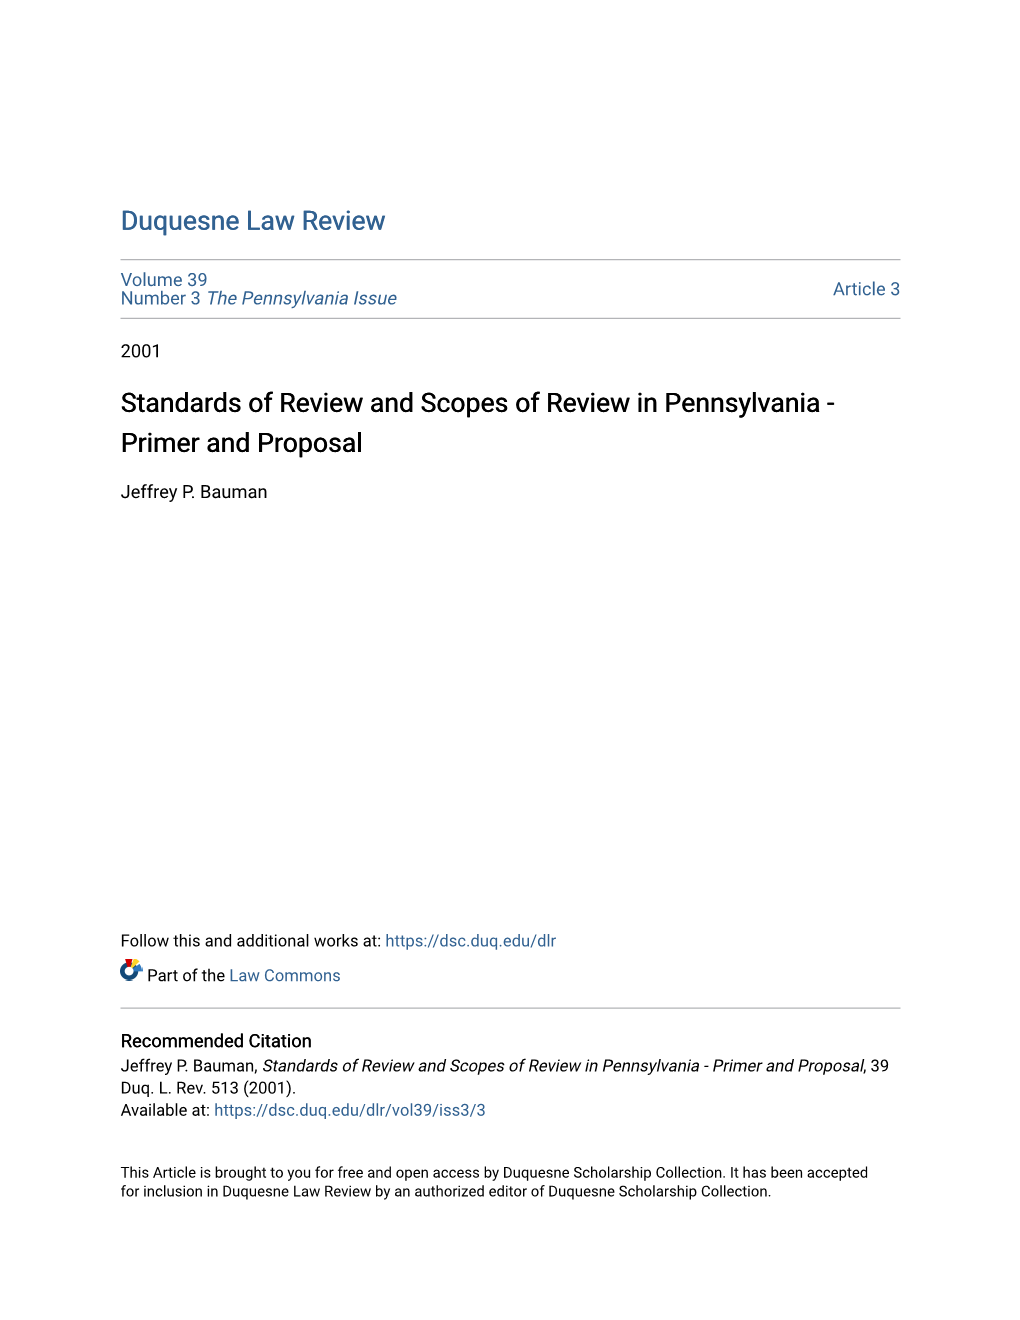 Standards of Review and Scopes of Review in Pennsylvania - Primer and Proposal